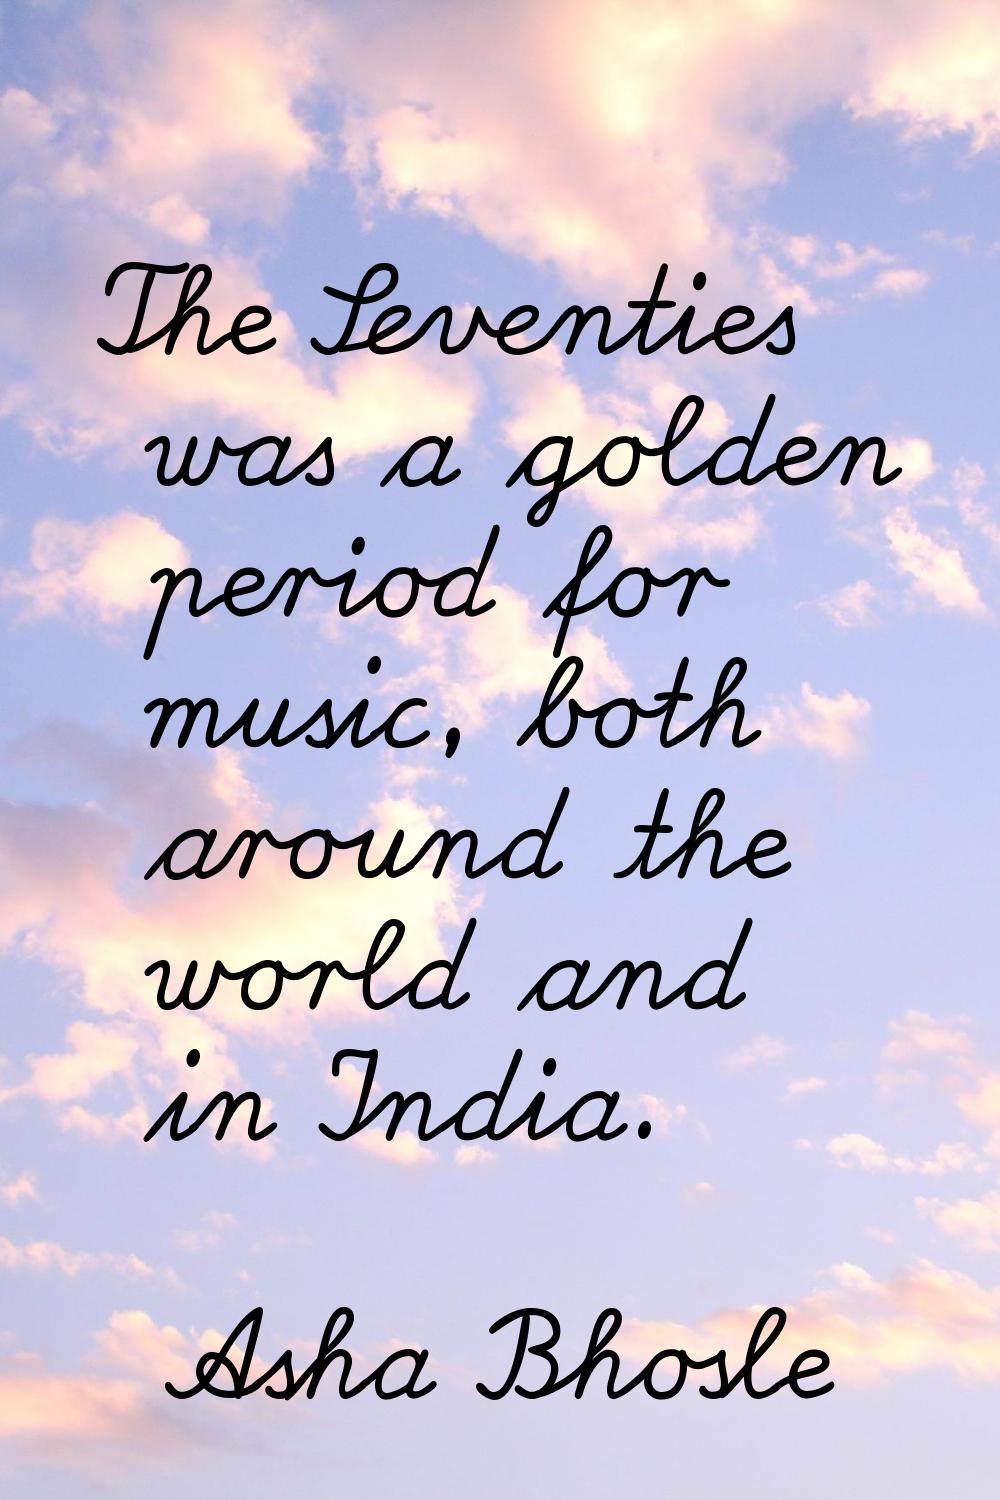 The Seventies was a golden period for music, both around the world and in India.